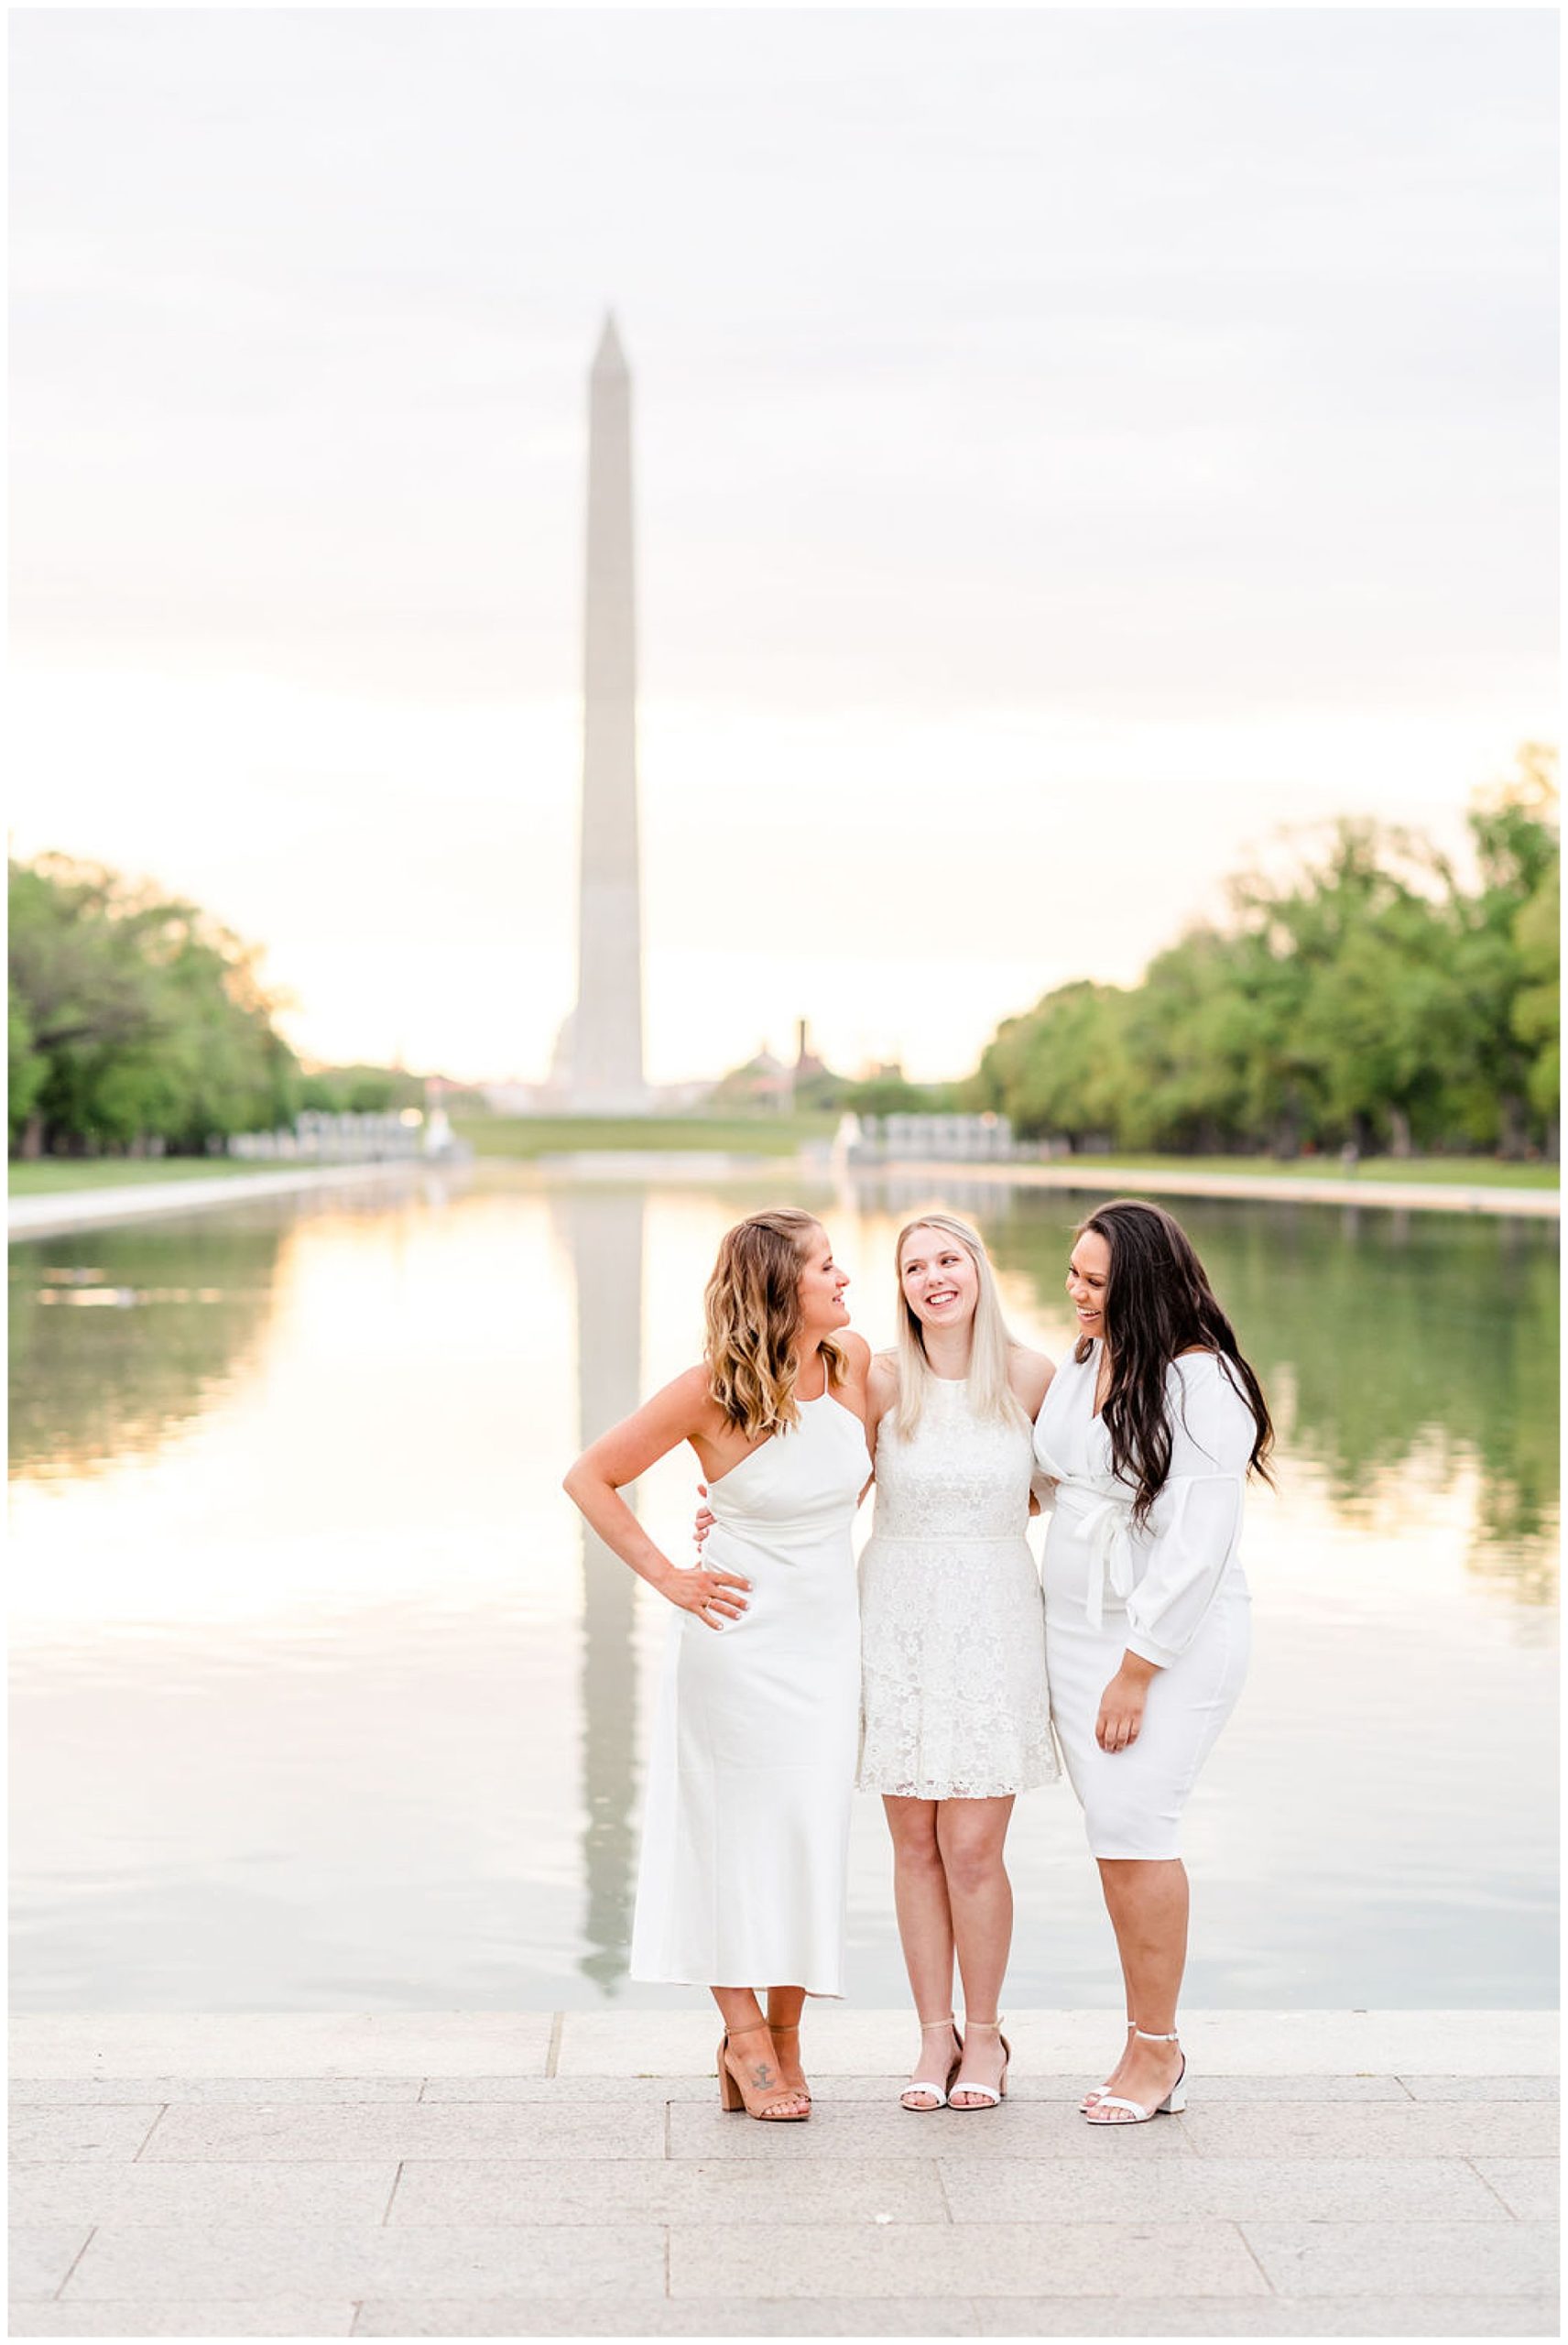 Marymount group graduation photos, LIncoln Memorial group graduation phtoos, Lincoln Memorial graduation photos, Lincoln memorial portraits, D.C. graduates, Washington D.C. universities, Marymount University graduates, Rachel E.H. Photography, three woman smiling, women laughing with each other, women in front of reflecting pool